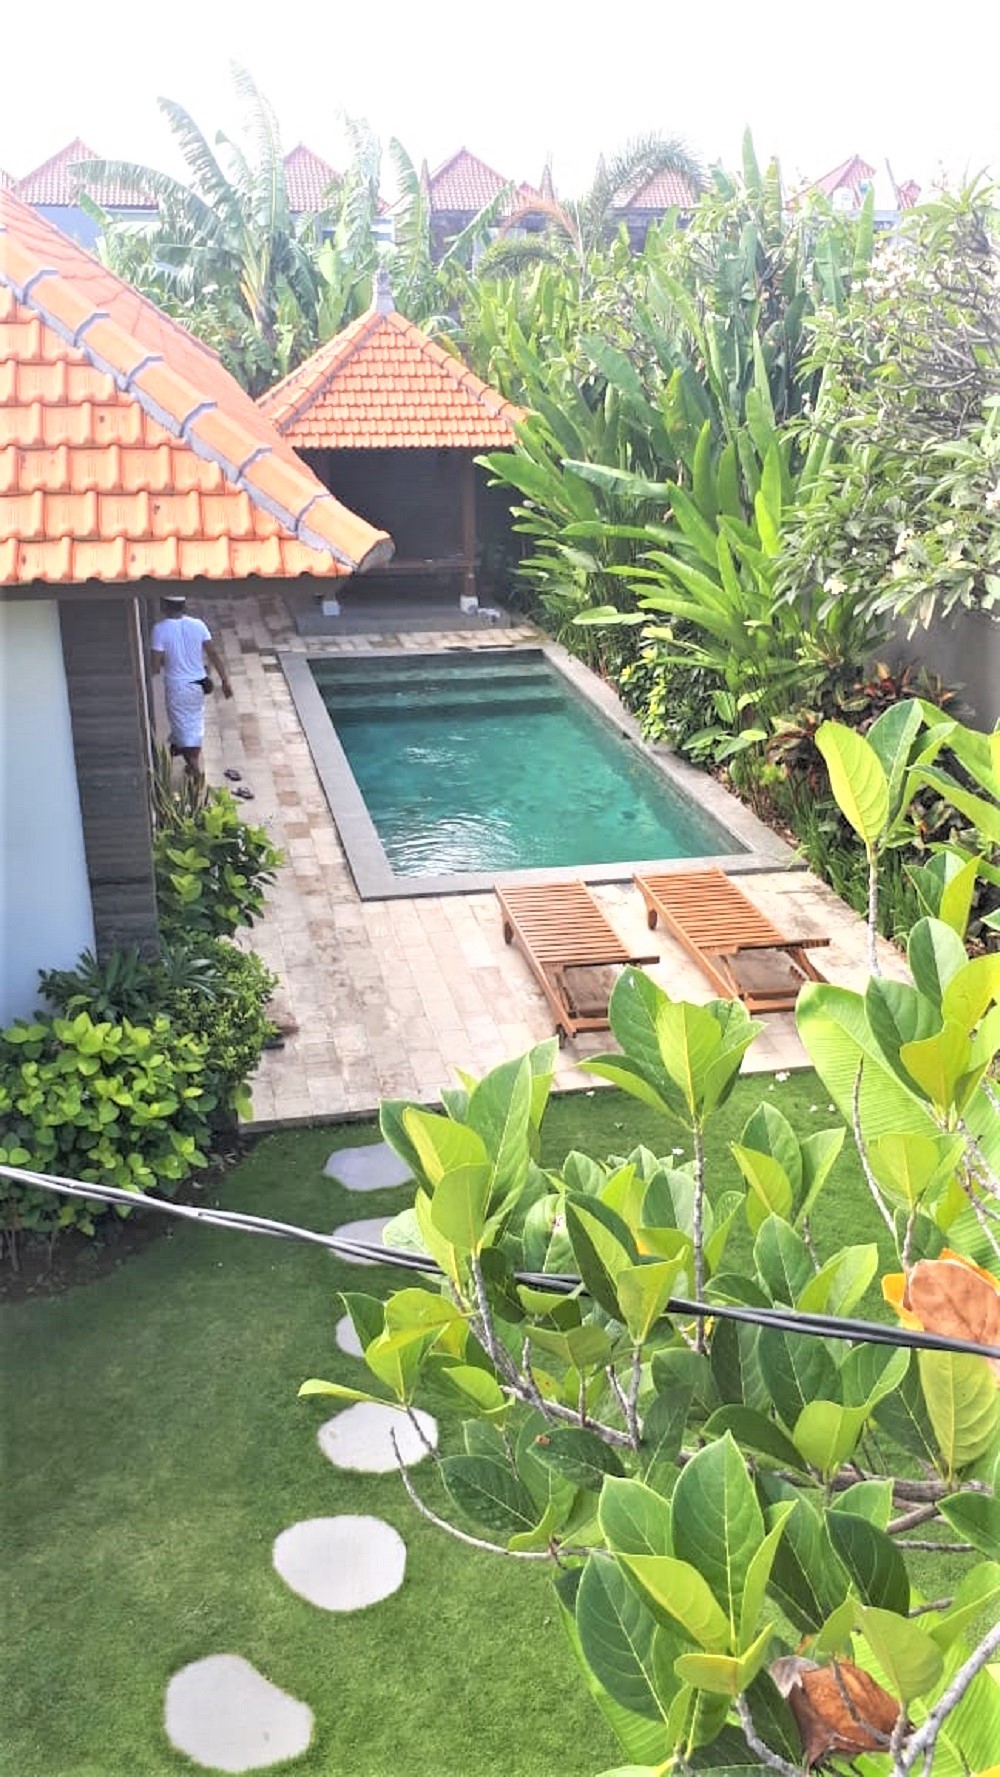 Lovely Two Bedroom Enclosed Living Villa in Seminyak Area (Available on September 2022)